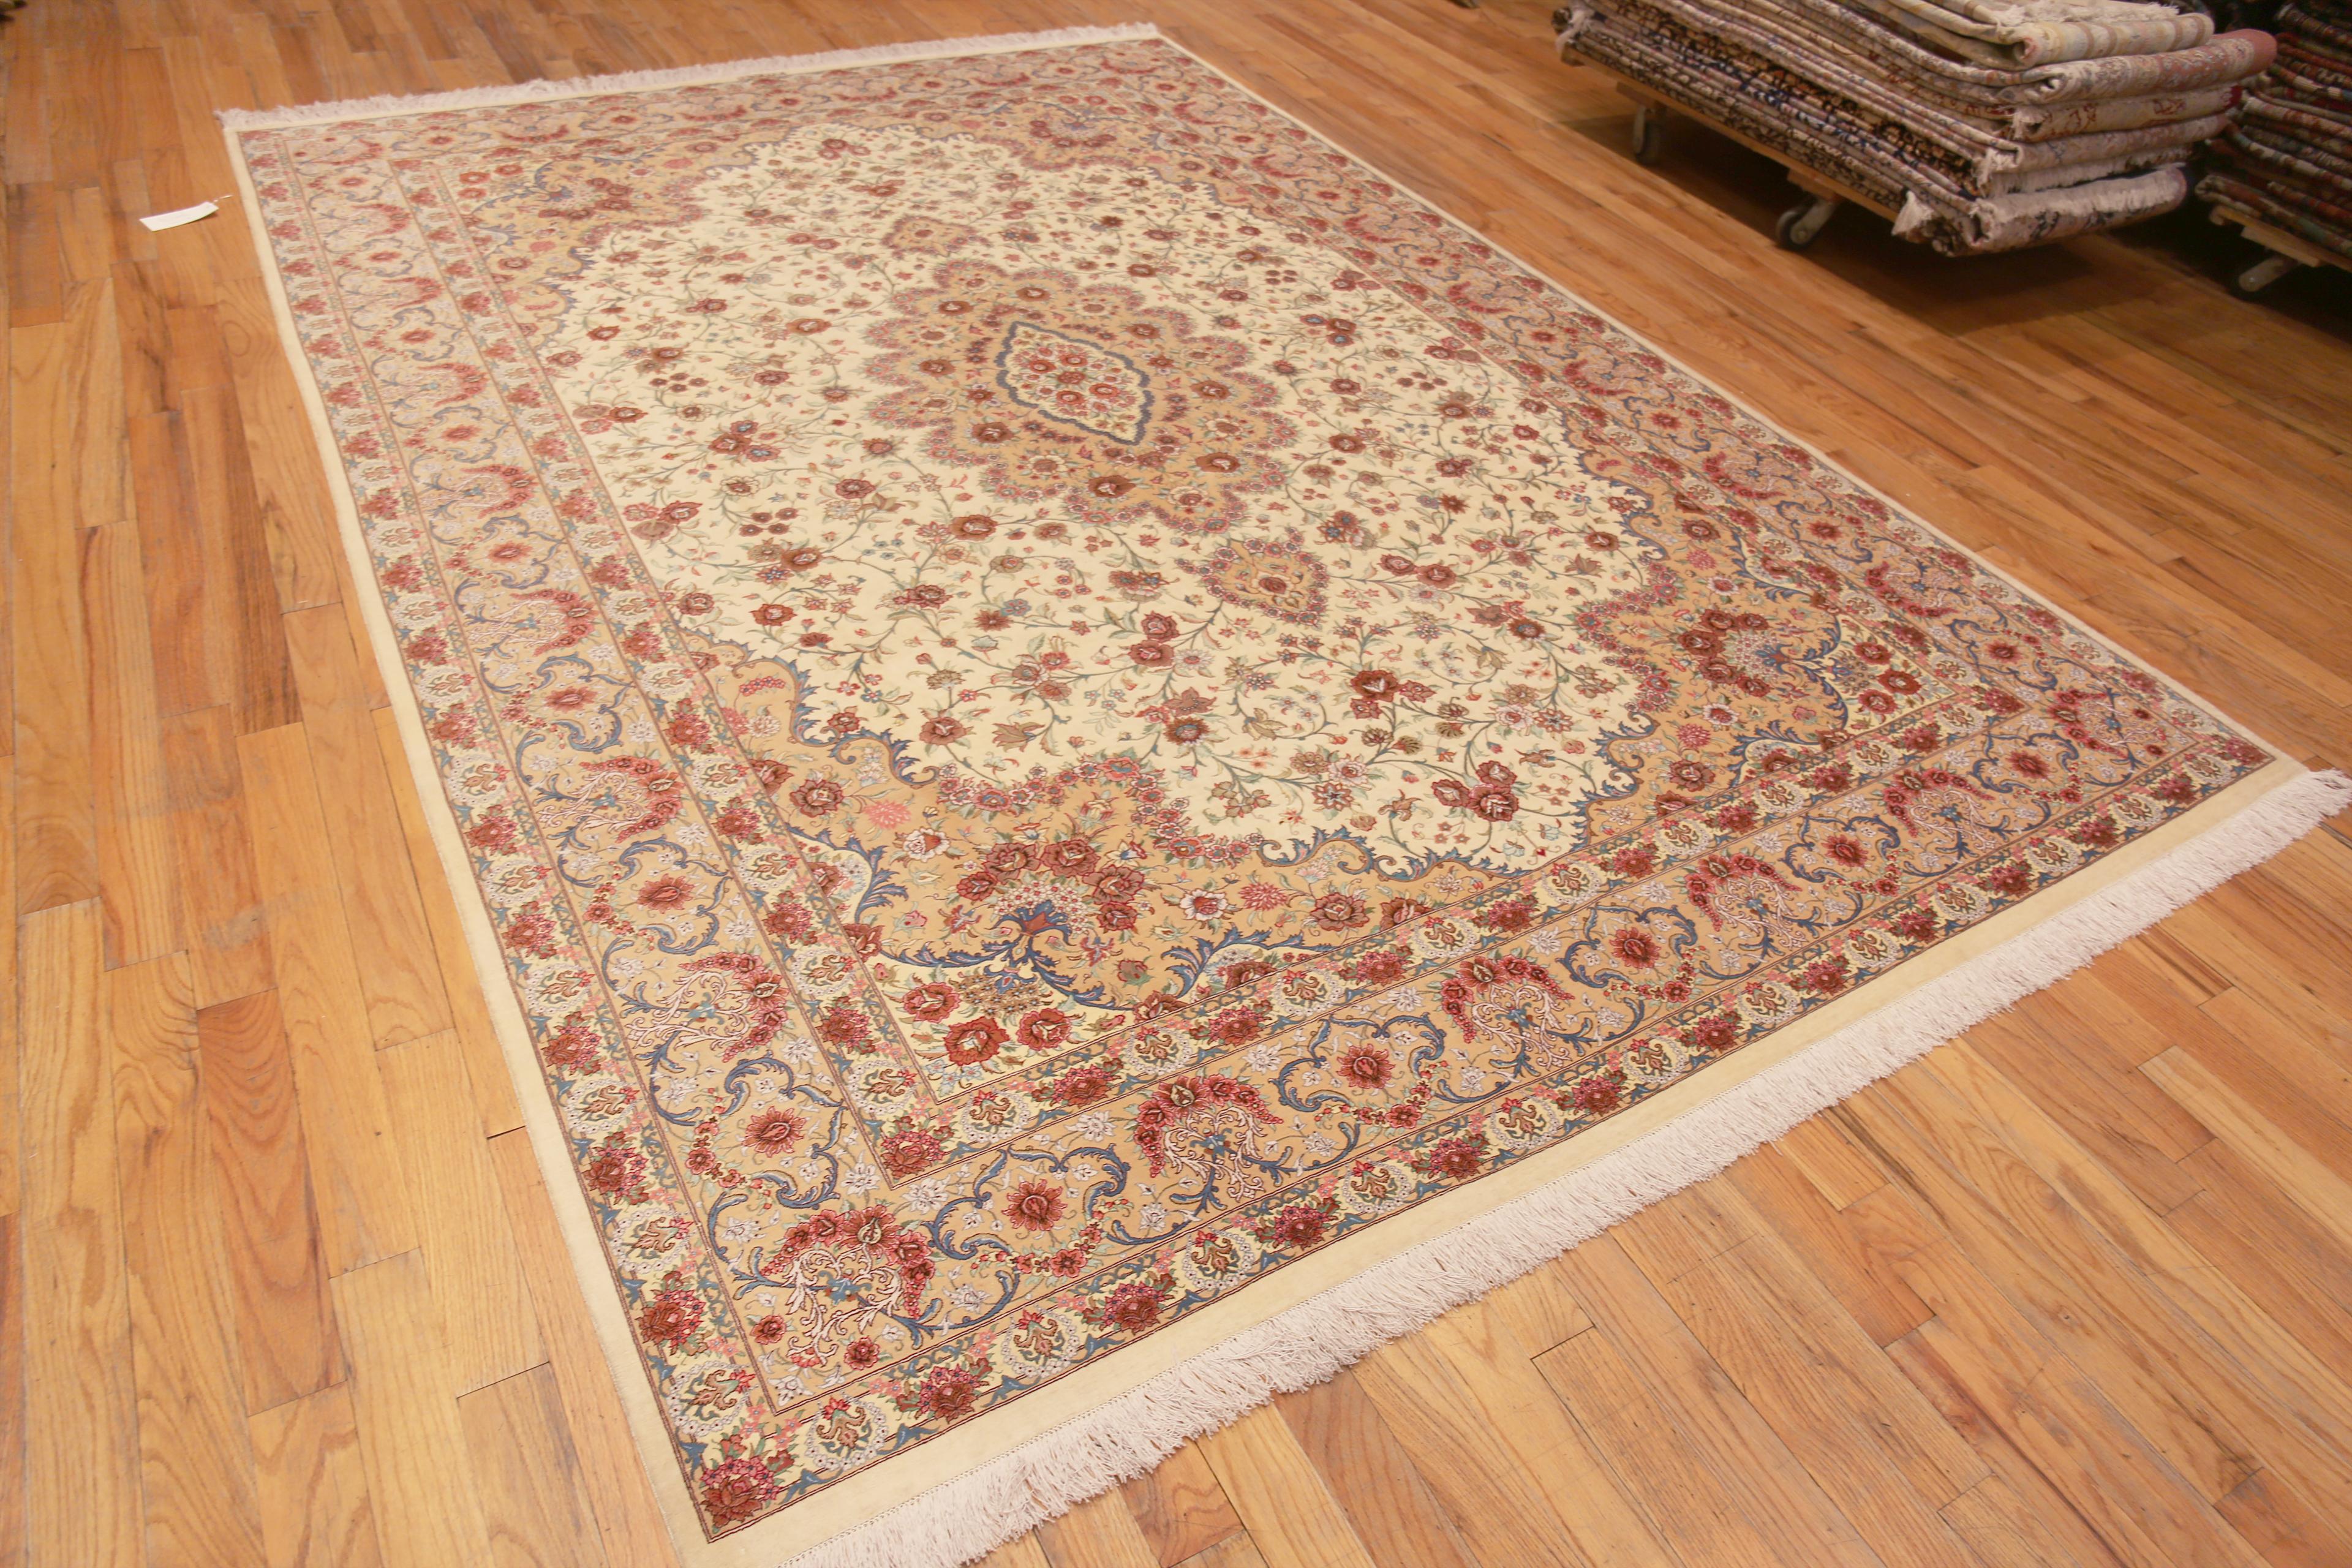 Hand-Knotted Gorgeous Luxurious Floral Room Size Vintage Persian Silk Qum Rug 8'2